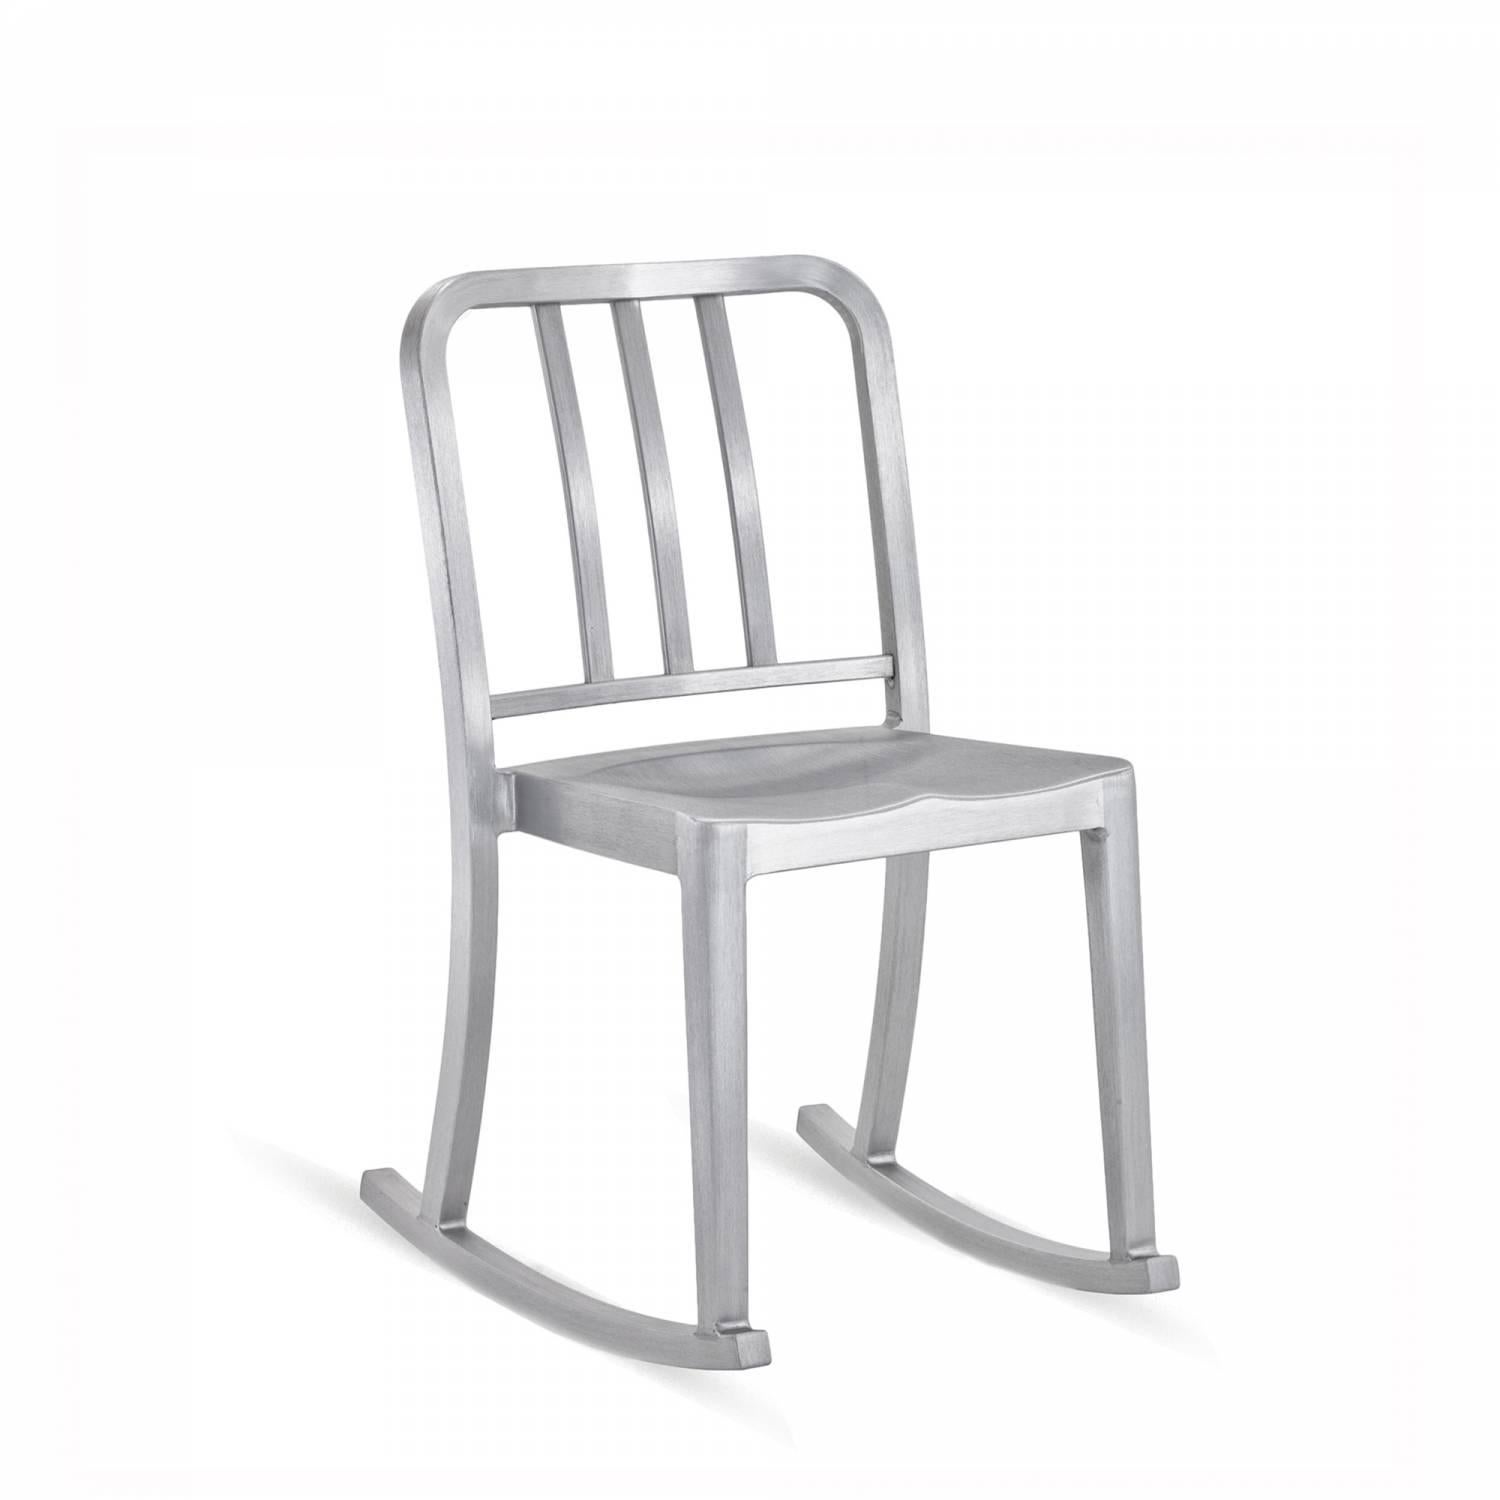 Heritage is a stacking chair designed by Philippe Starck, inspired by the original 1006 Navy.The rocking version was designed for the world famous Bon restaurant in Paris. Intended as a “sit up” chair for working and dining, it’s a symbol of Emeco’s